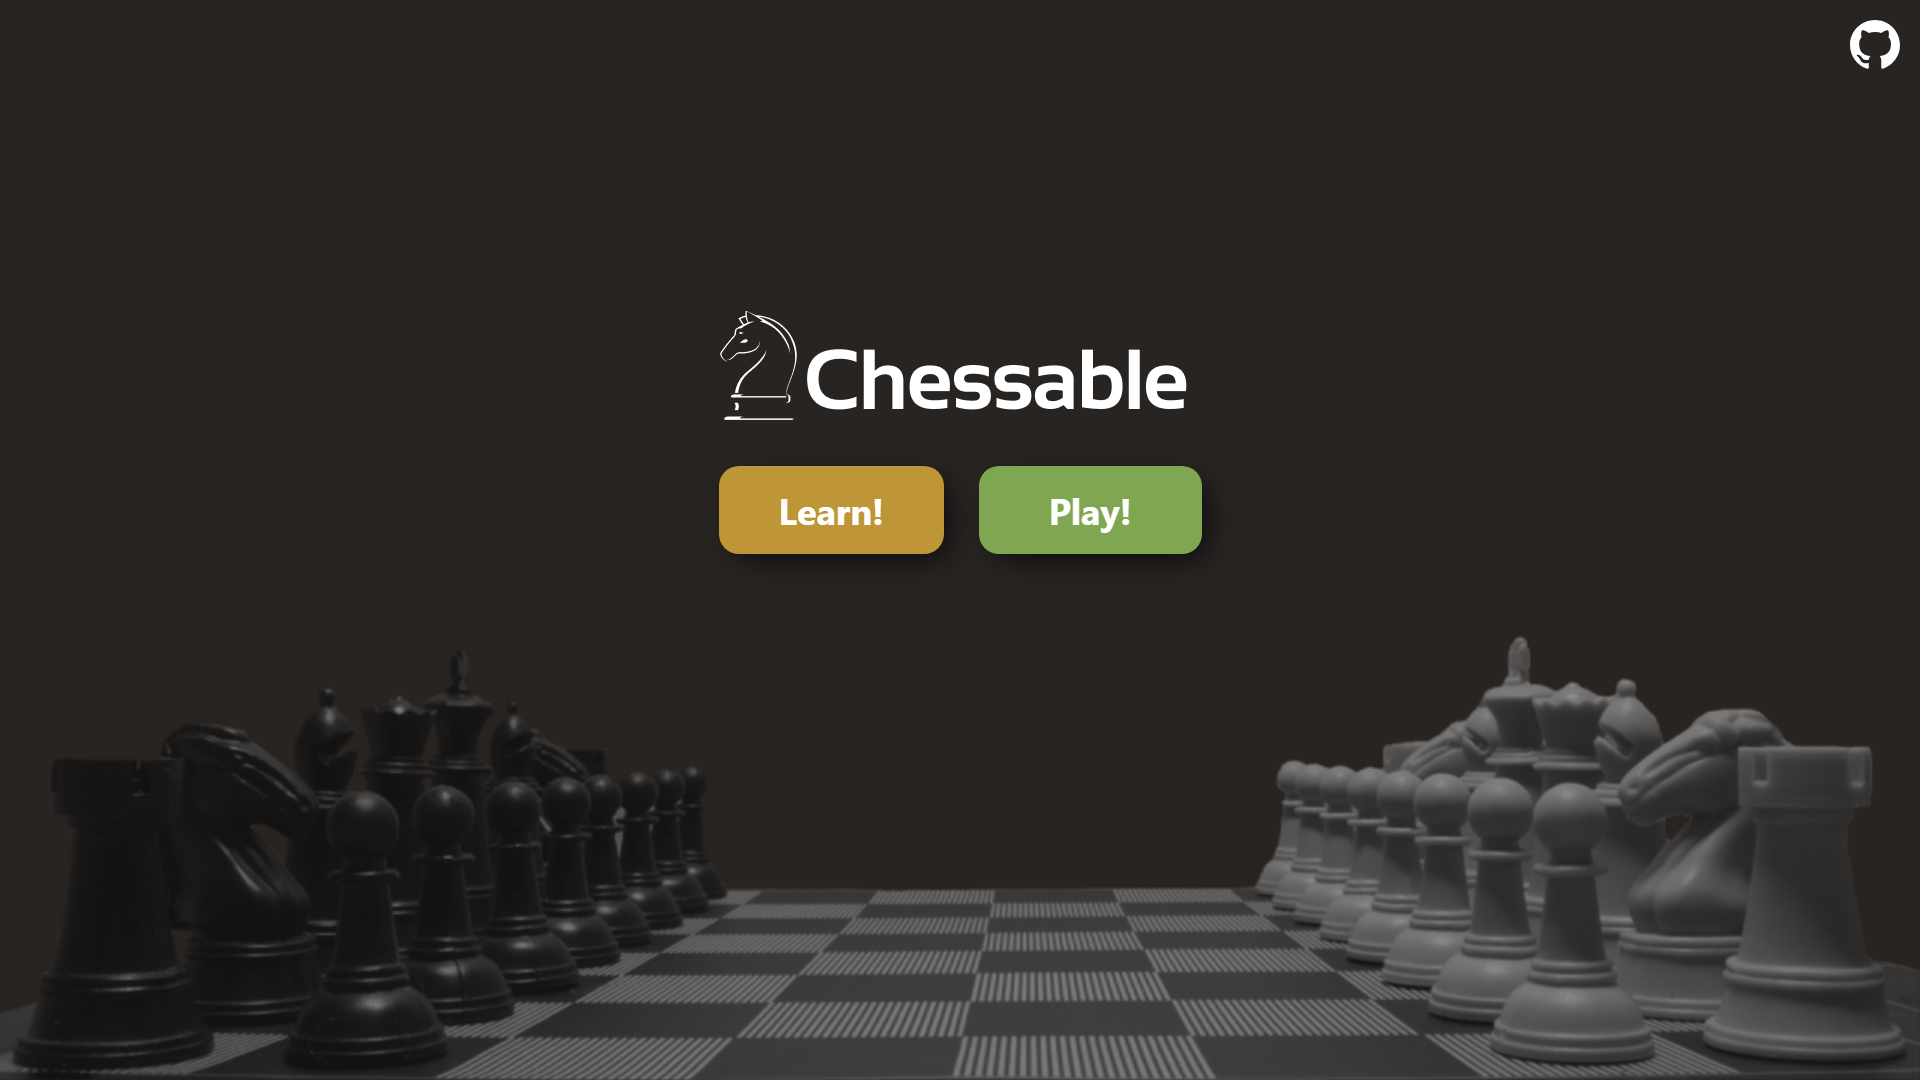 Chessable landing page